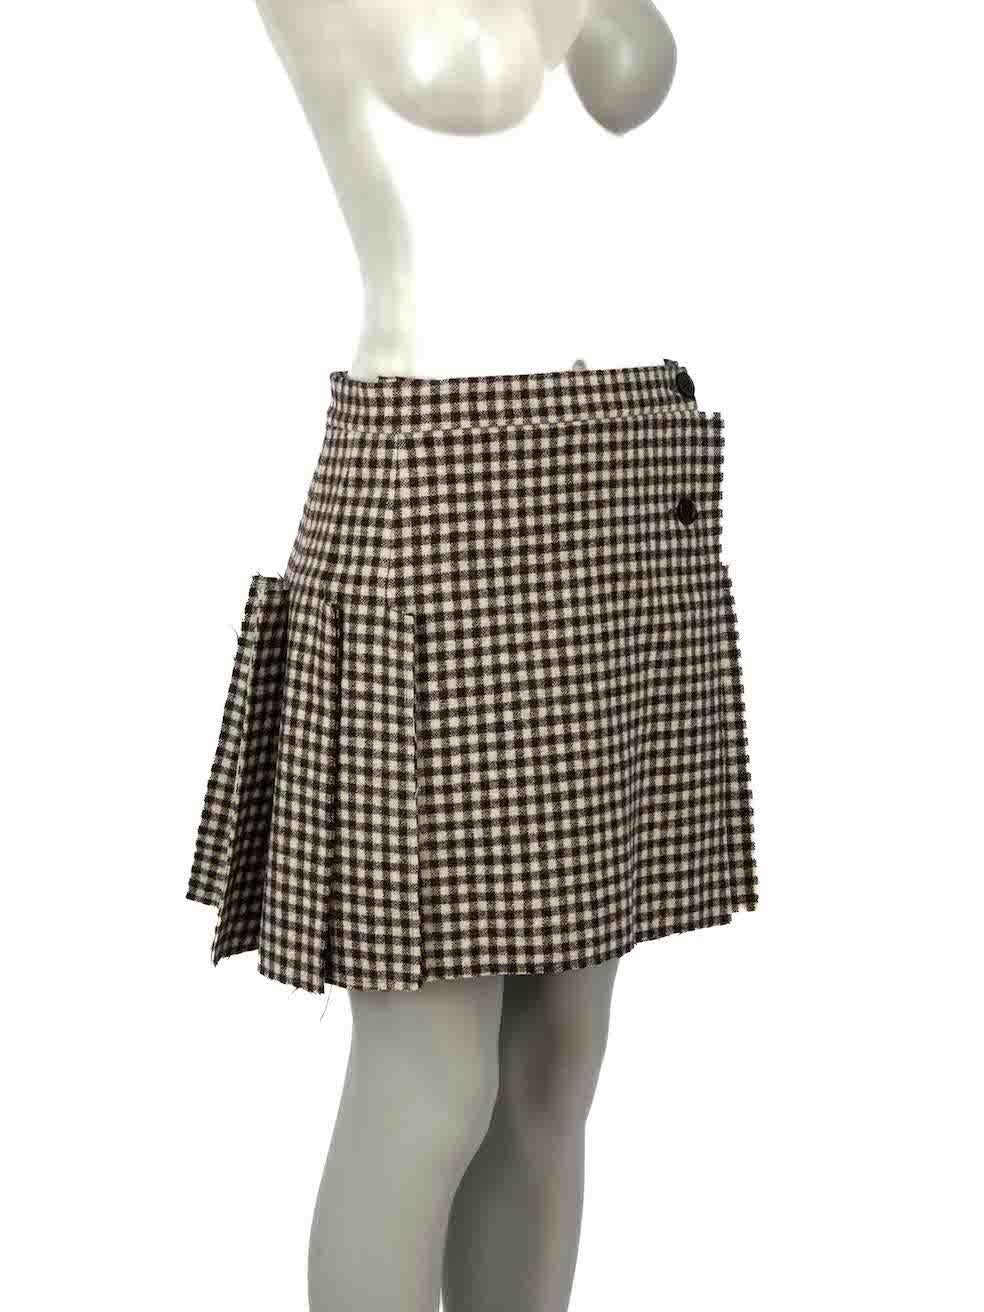 CONDITION is Very good. Hardly any visible wear to skirt is evident on this used Vivienne Westwood designer resale item. Please note that the edges of skirt are deliberately frayed.

Details
Brown
Wool
Wrap skirt
Mini
Gingham pattern
Raw hem